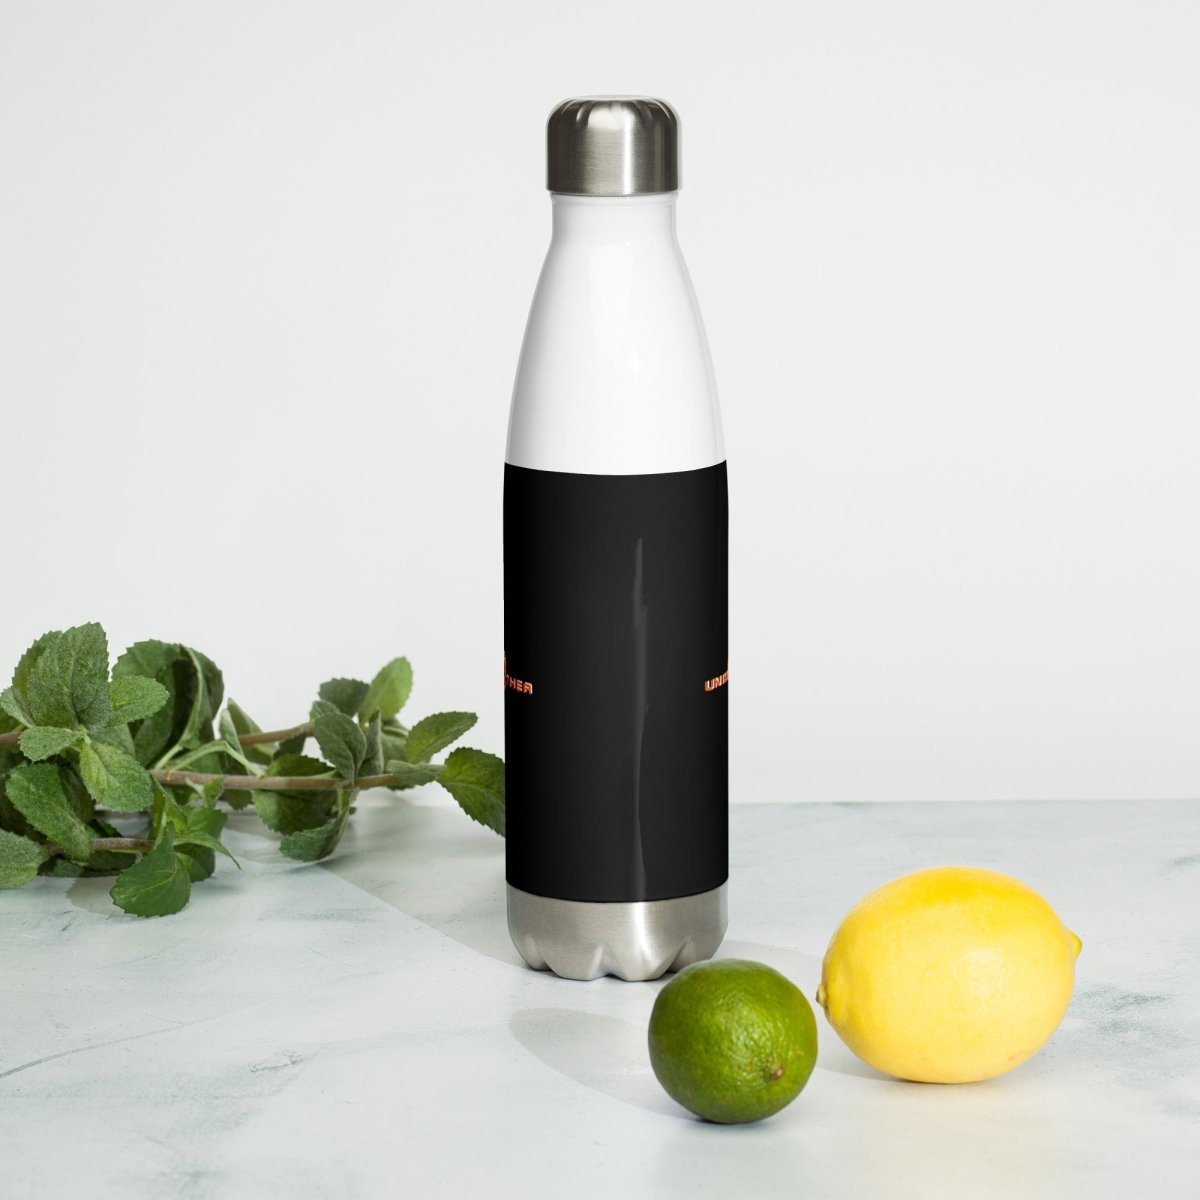 Black Unimother Stainless Steel Water Bottle - Unimother